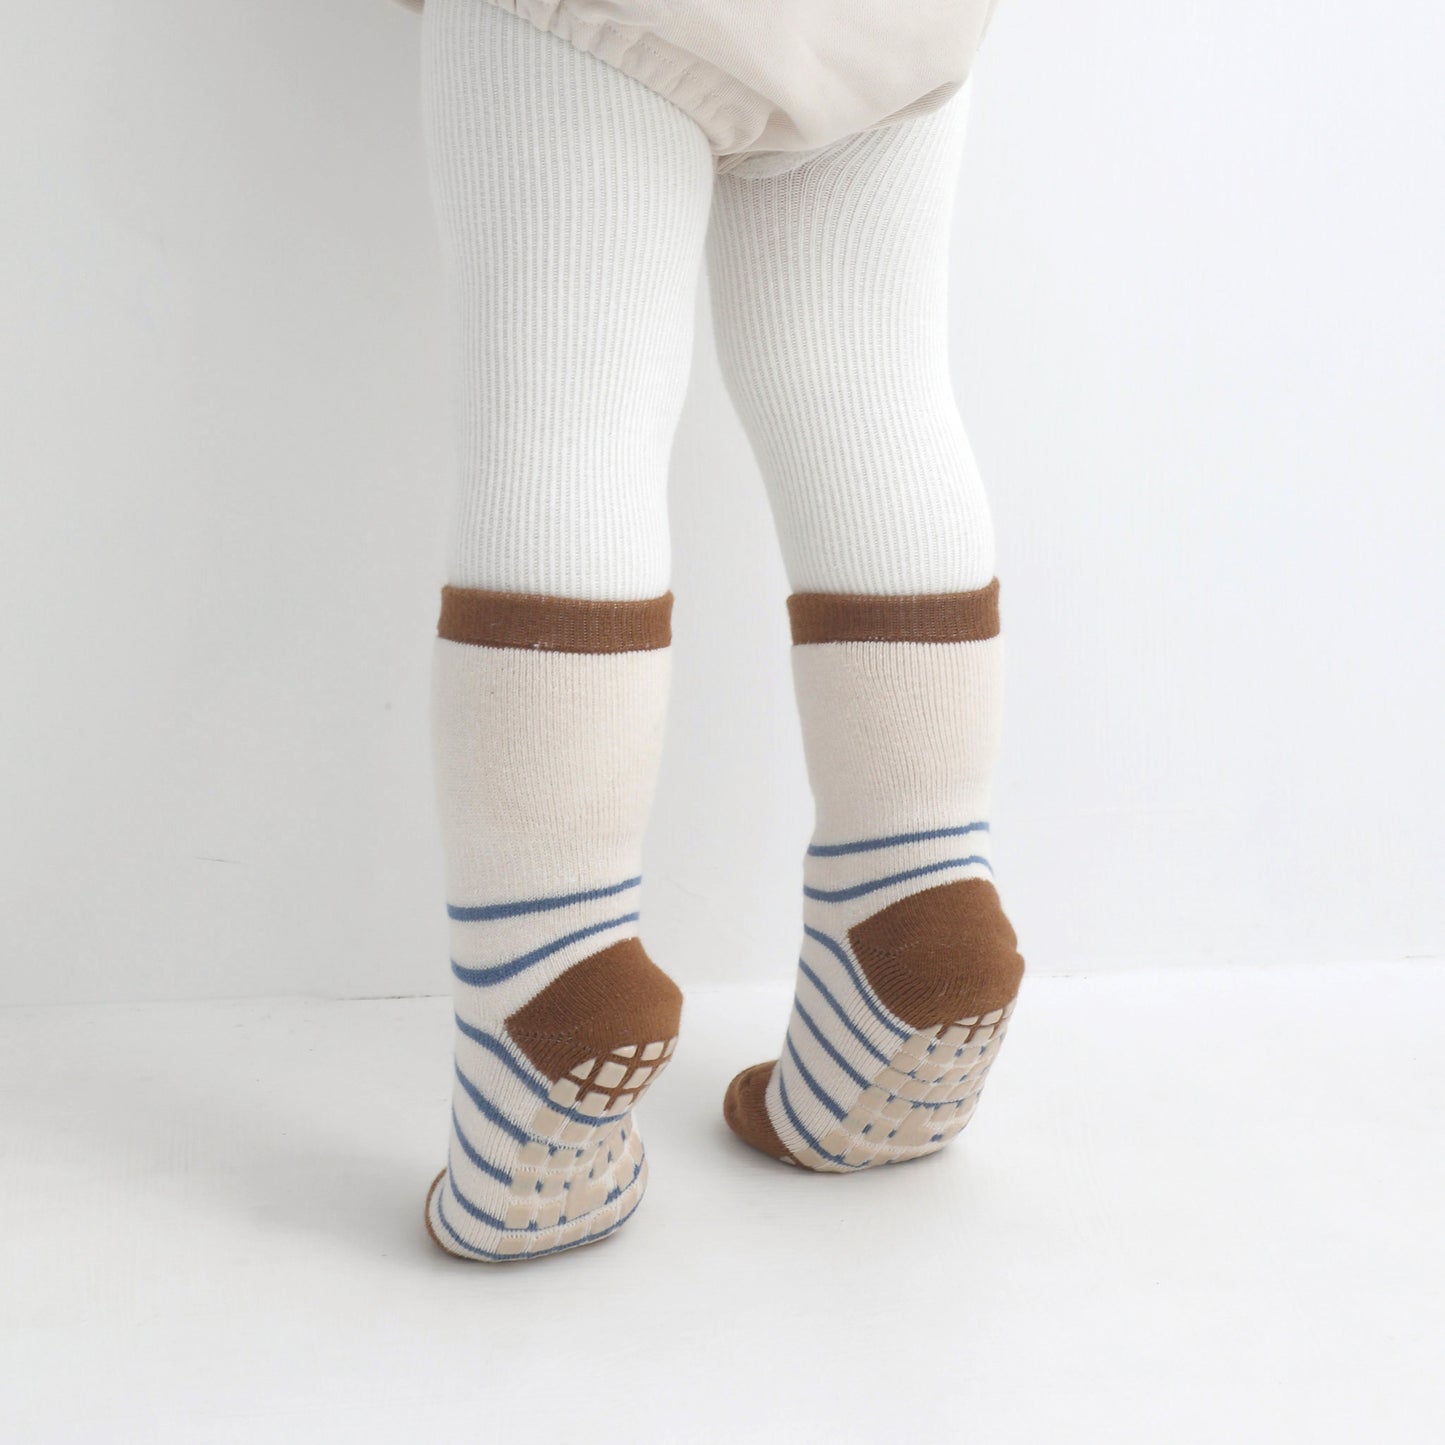 grip socks for little adventurers, ensuring foot safety with style.